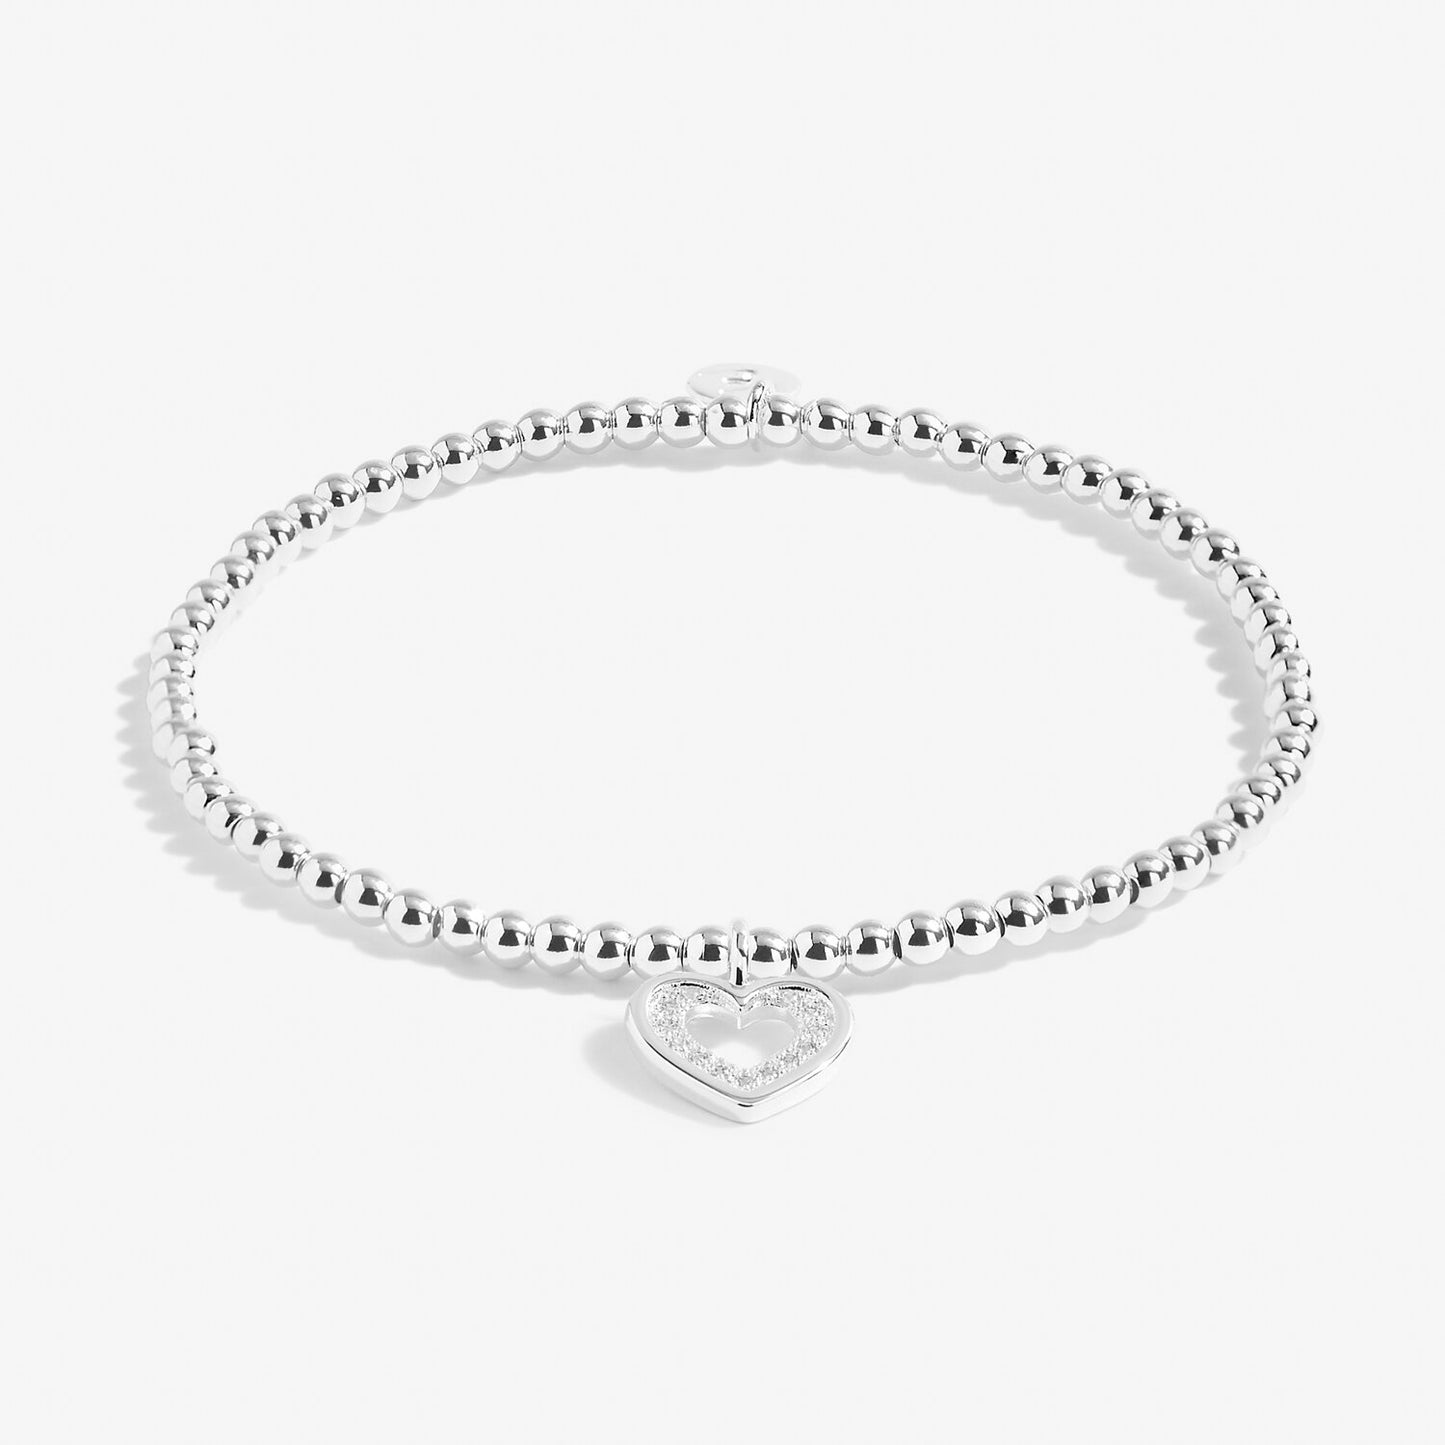 Joma Bracelet 5225 - Be Your Own Kind Of Beautiful